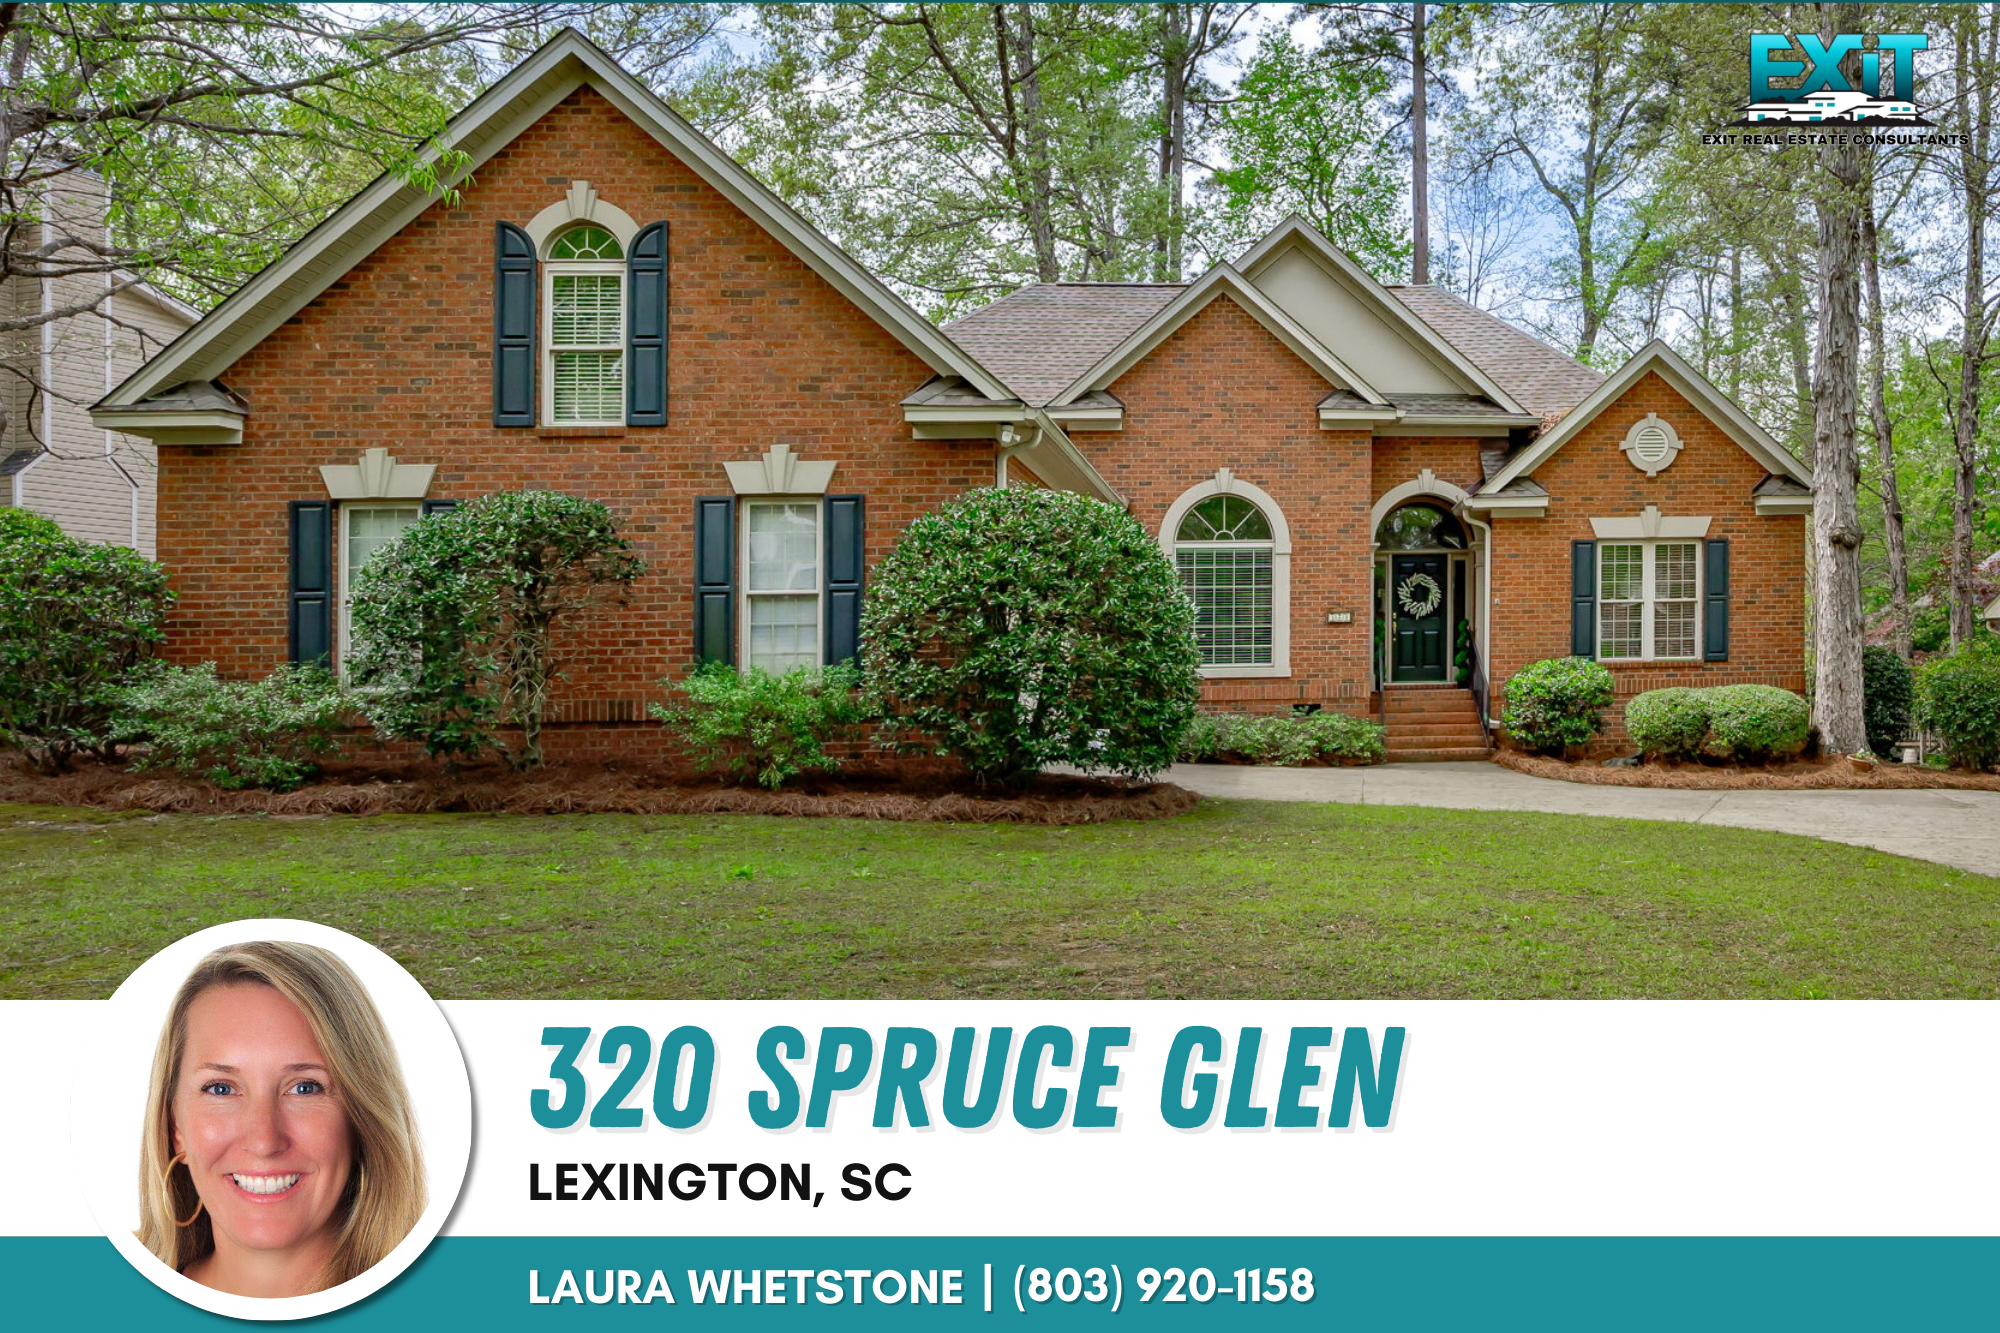 Just listed in Hope Ferry Plantation - Lexington